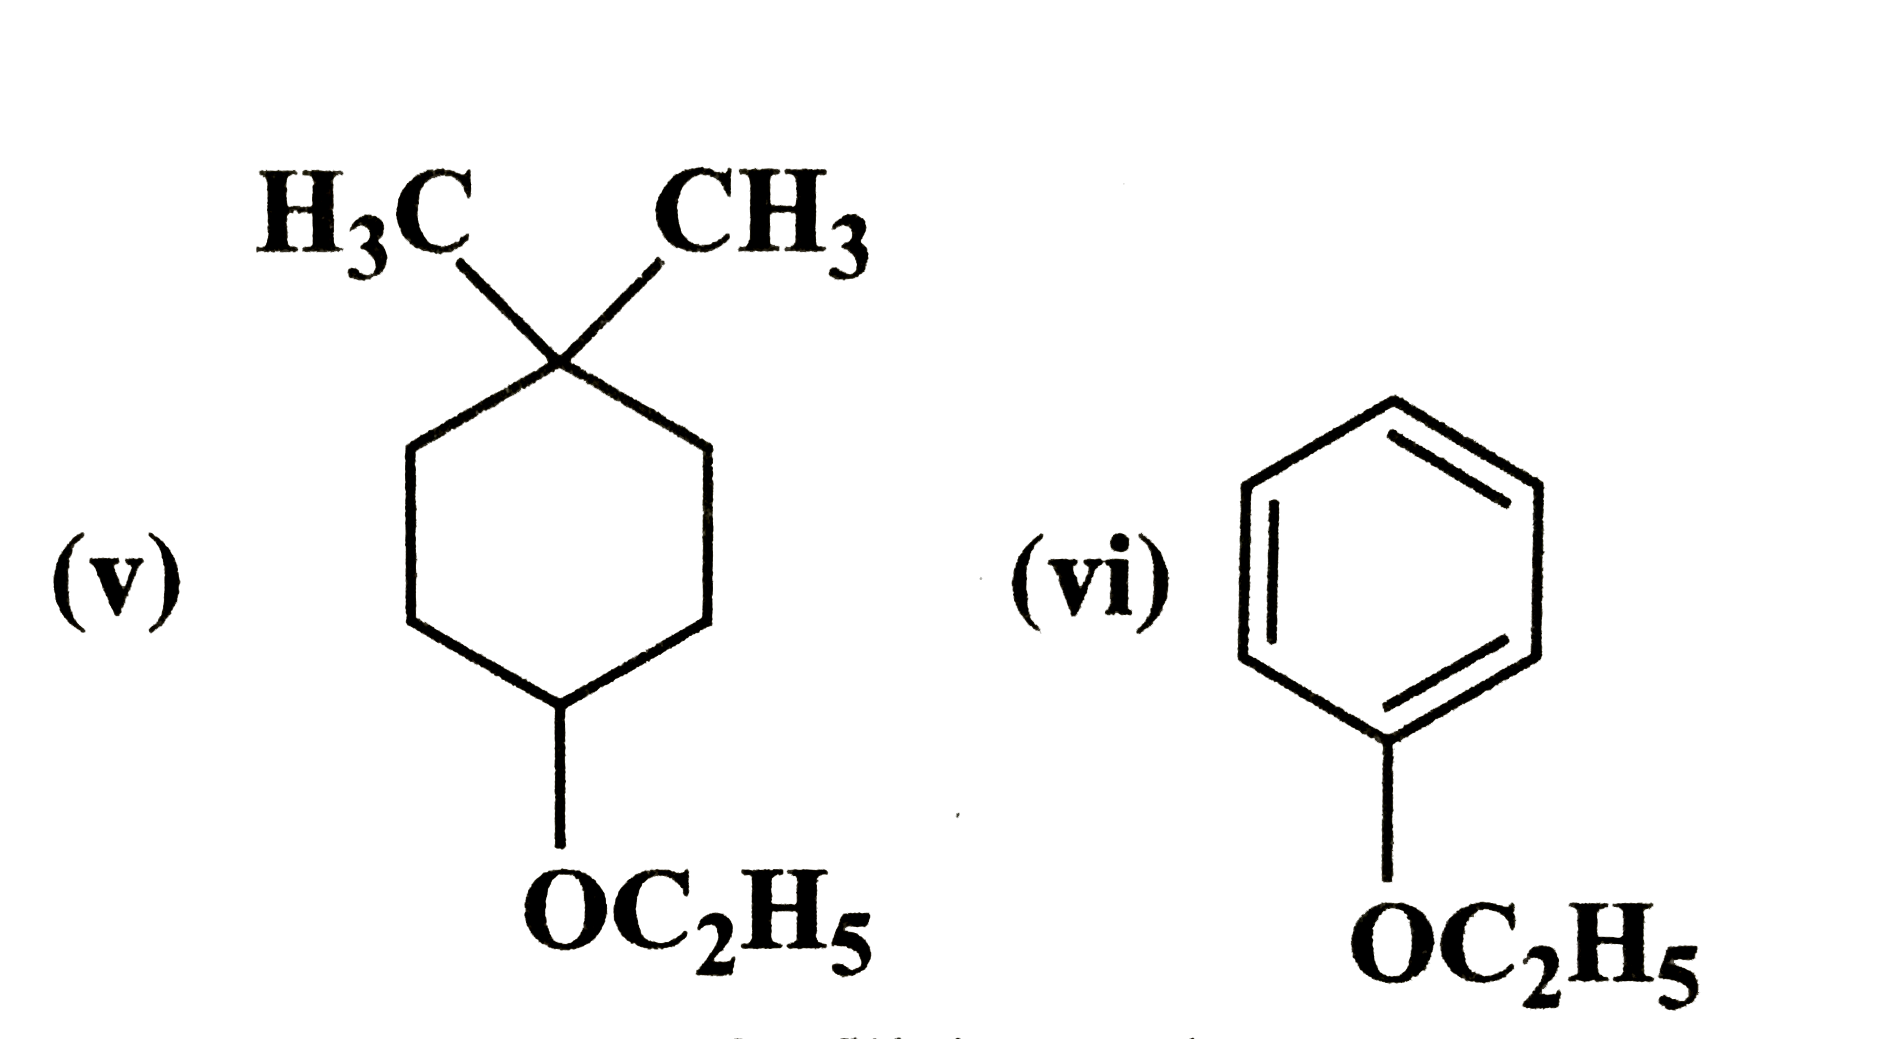 Give the IUPAC names of the following ethers:   (i) C(2)H(5)OCH(2)-underset(CH(3))underset(|)(C)H-CH(3) (ii) CH(3)-O-CH(2)CH(2)Cl   (iii) O(2)N-C(6)H(4)-OCH(3)(p)   (iv) CH(3)-CH(2)-CH(2)-OCH(3)   (v)